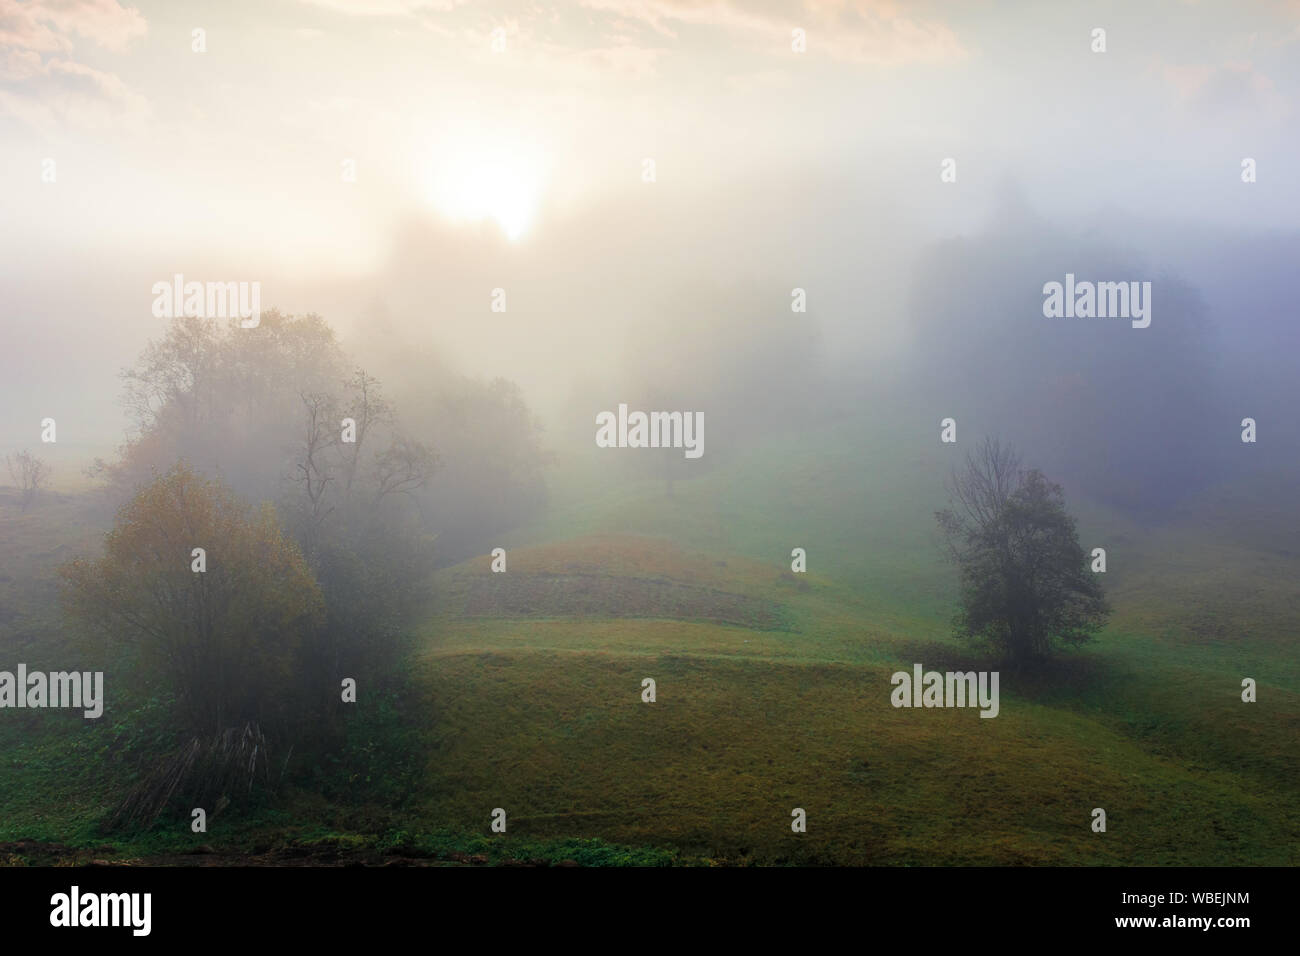 thick fog in autumn countryside. trees on hills in rural area. sunlight breaking through. mysterious weather phenomenon Stock Photo